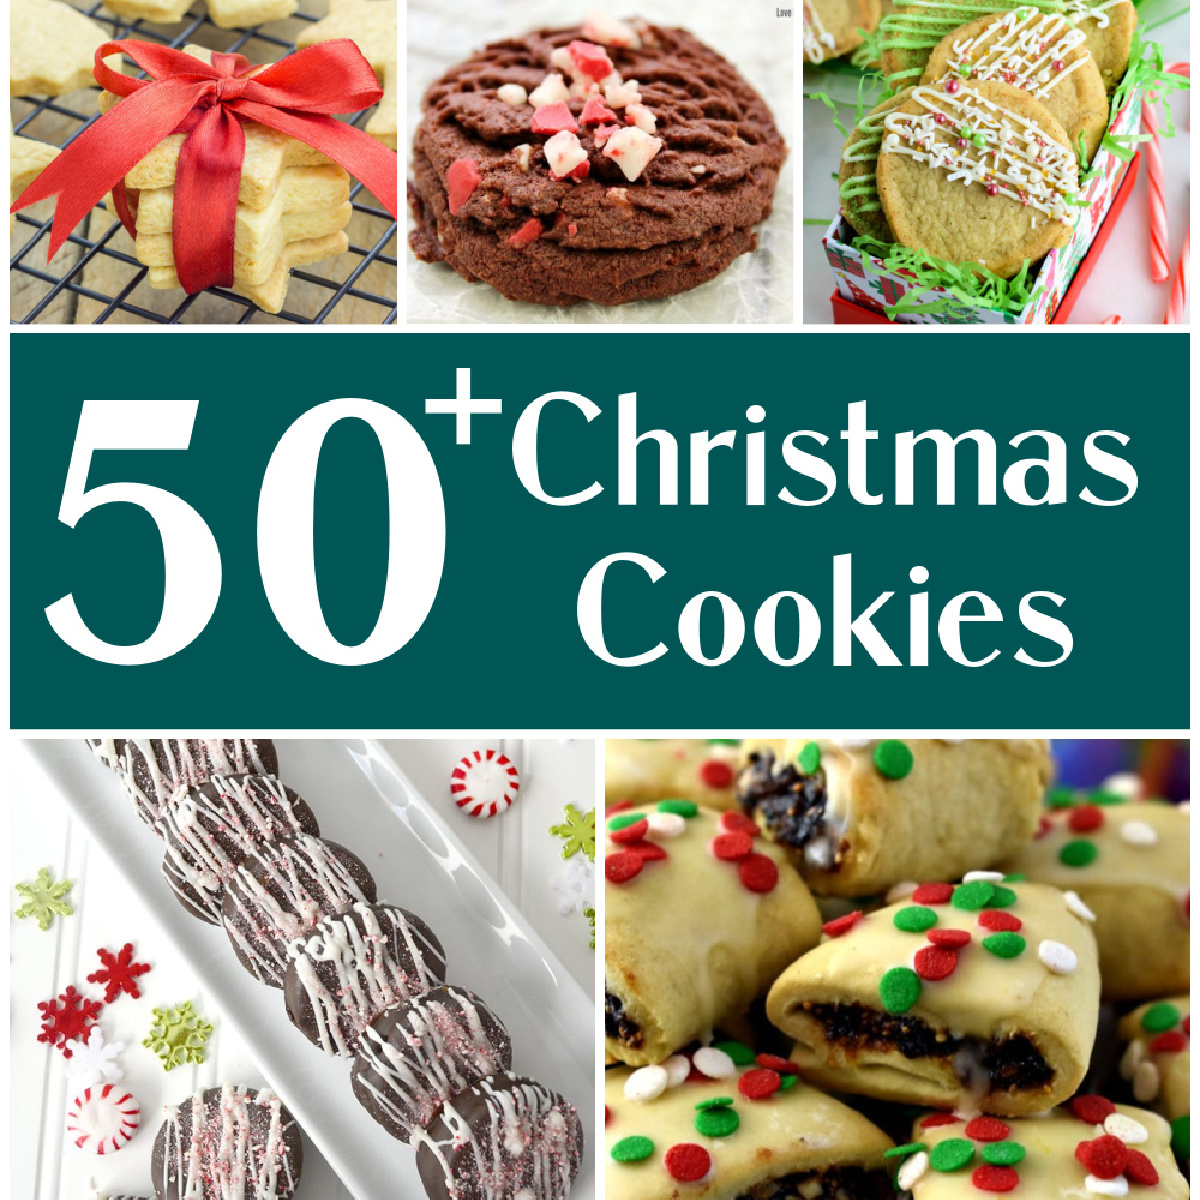 Square collage image with Christmas Cookies and text overlay reading 50+ Christmas Cookies.